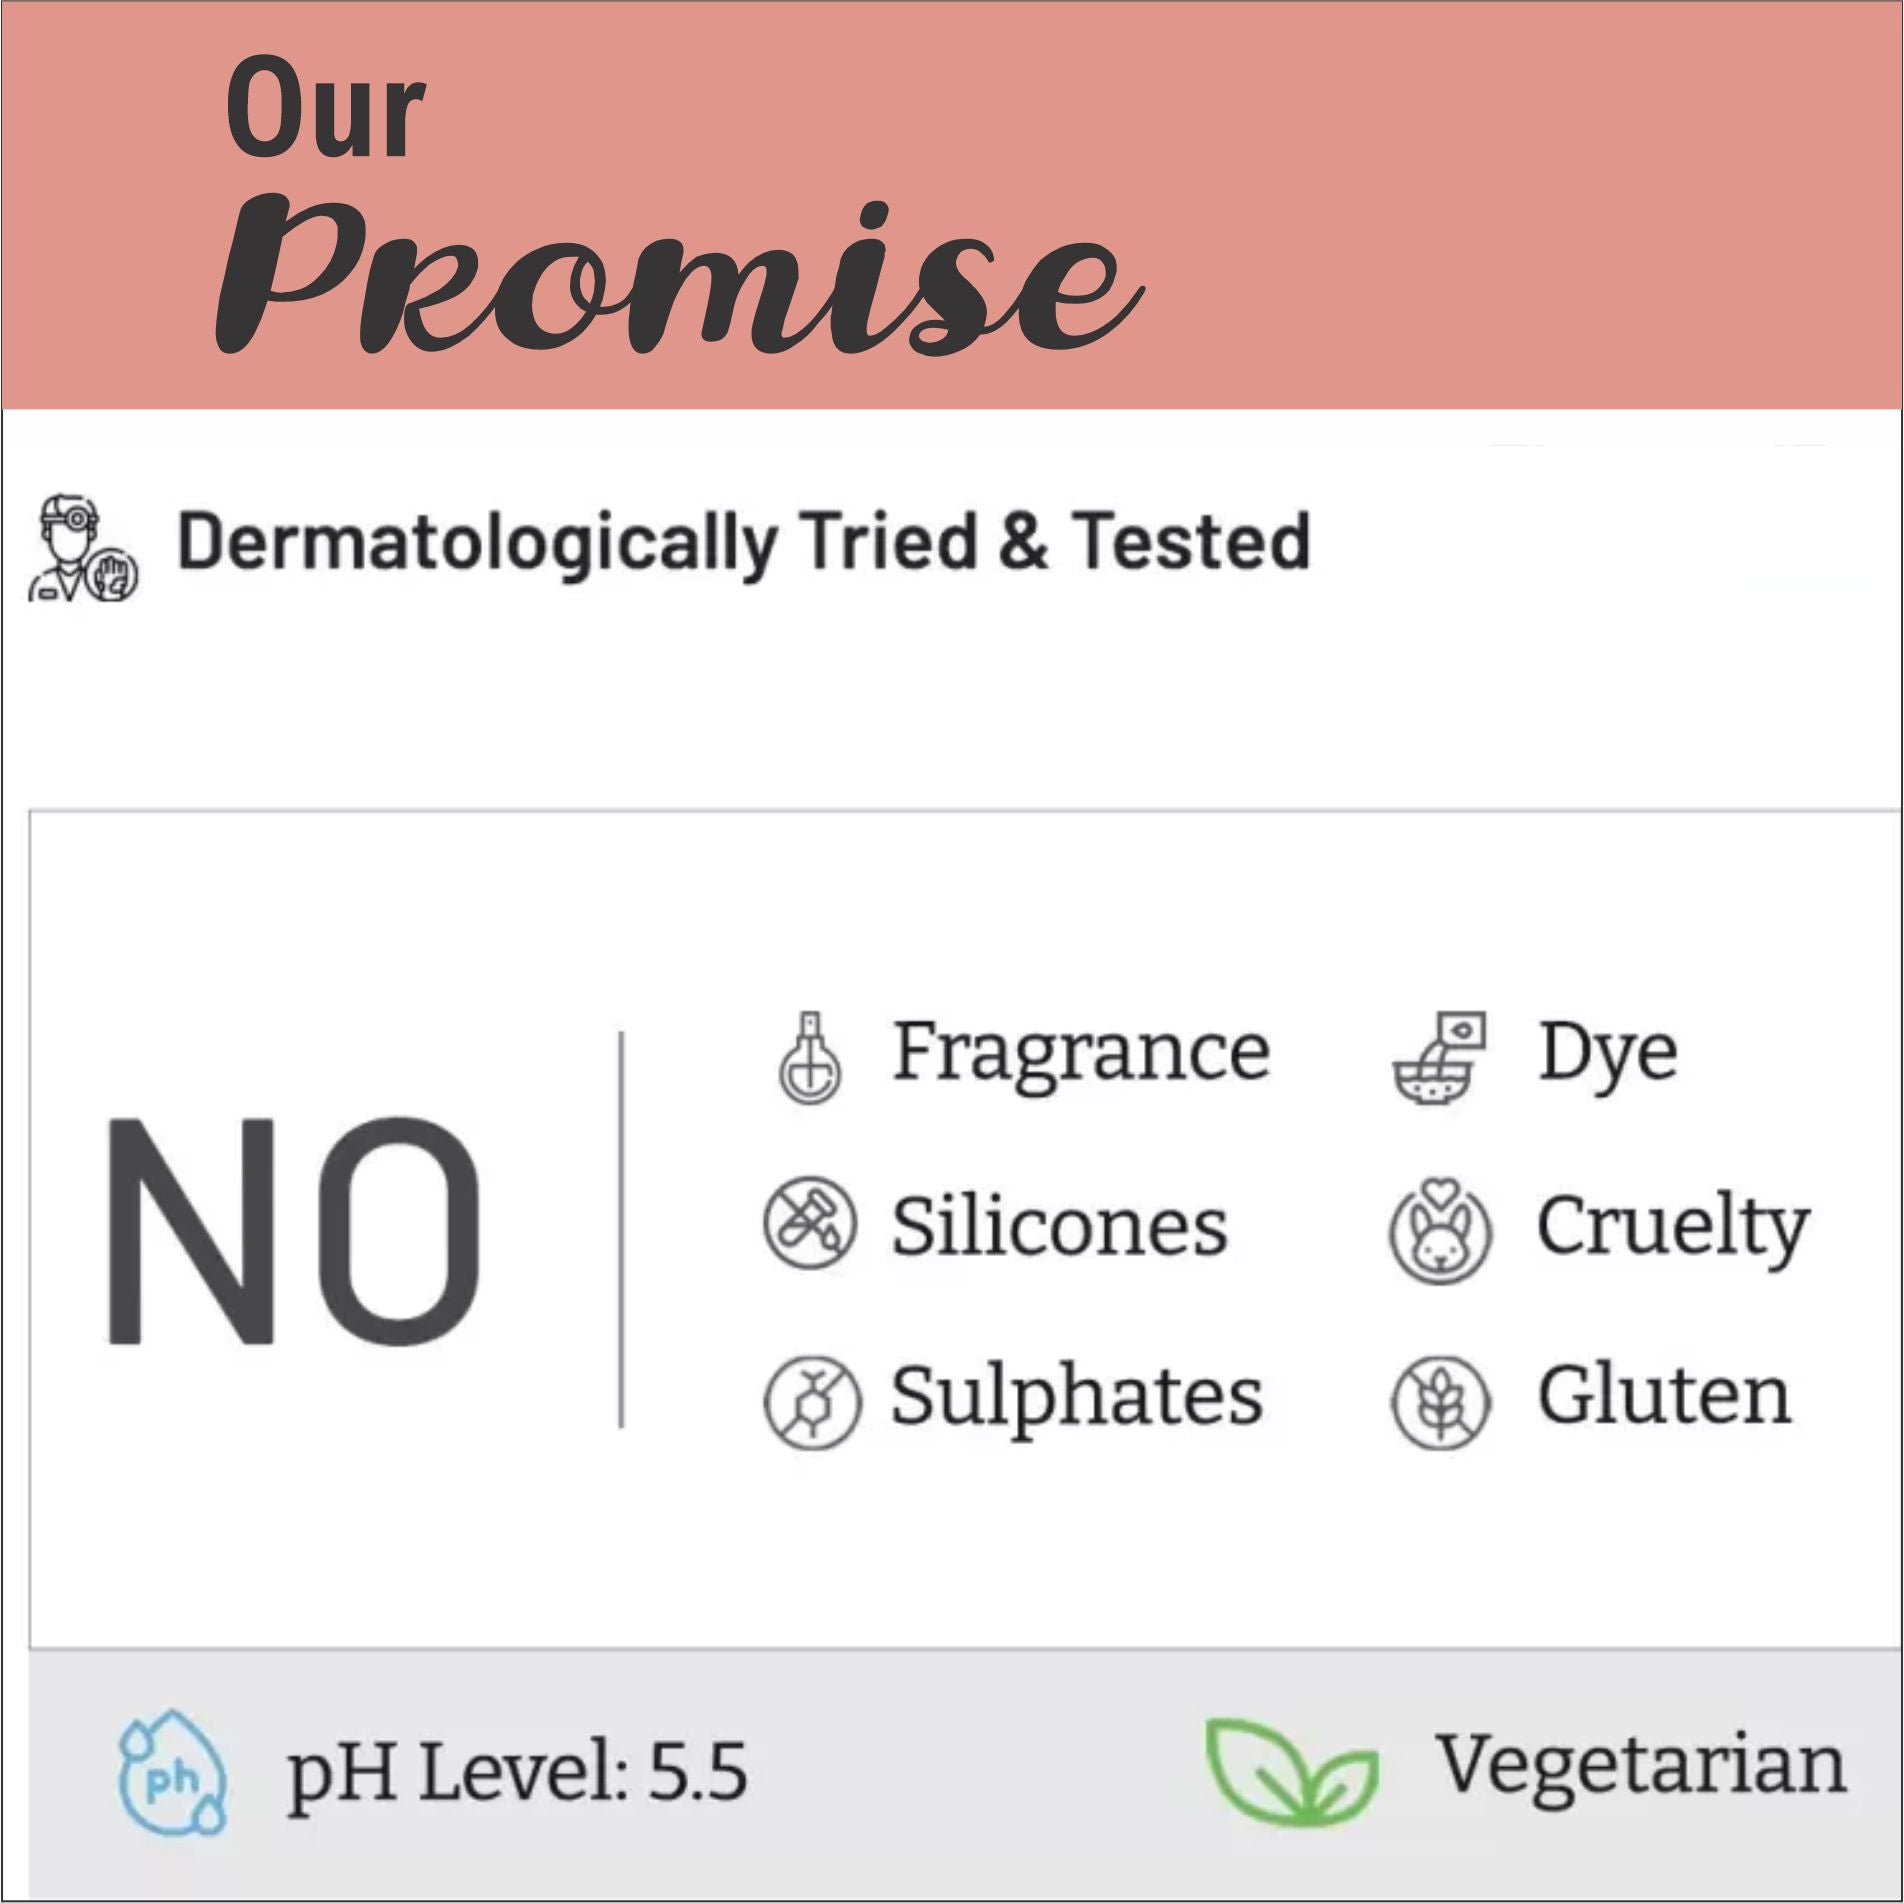 Dermatologist Tested - Trust in the Quality of Our Product